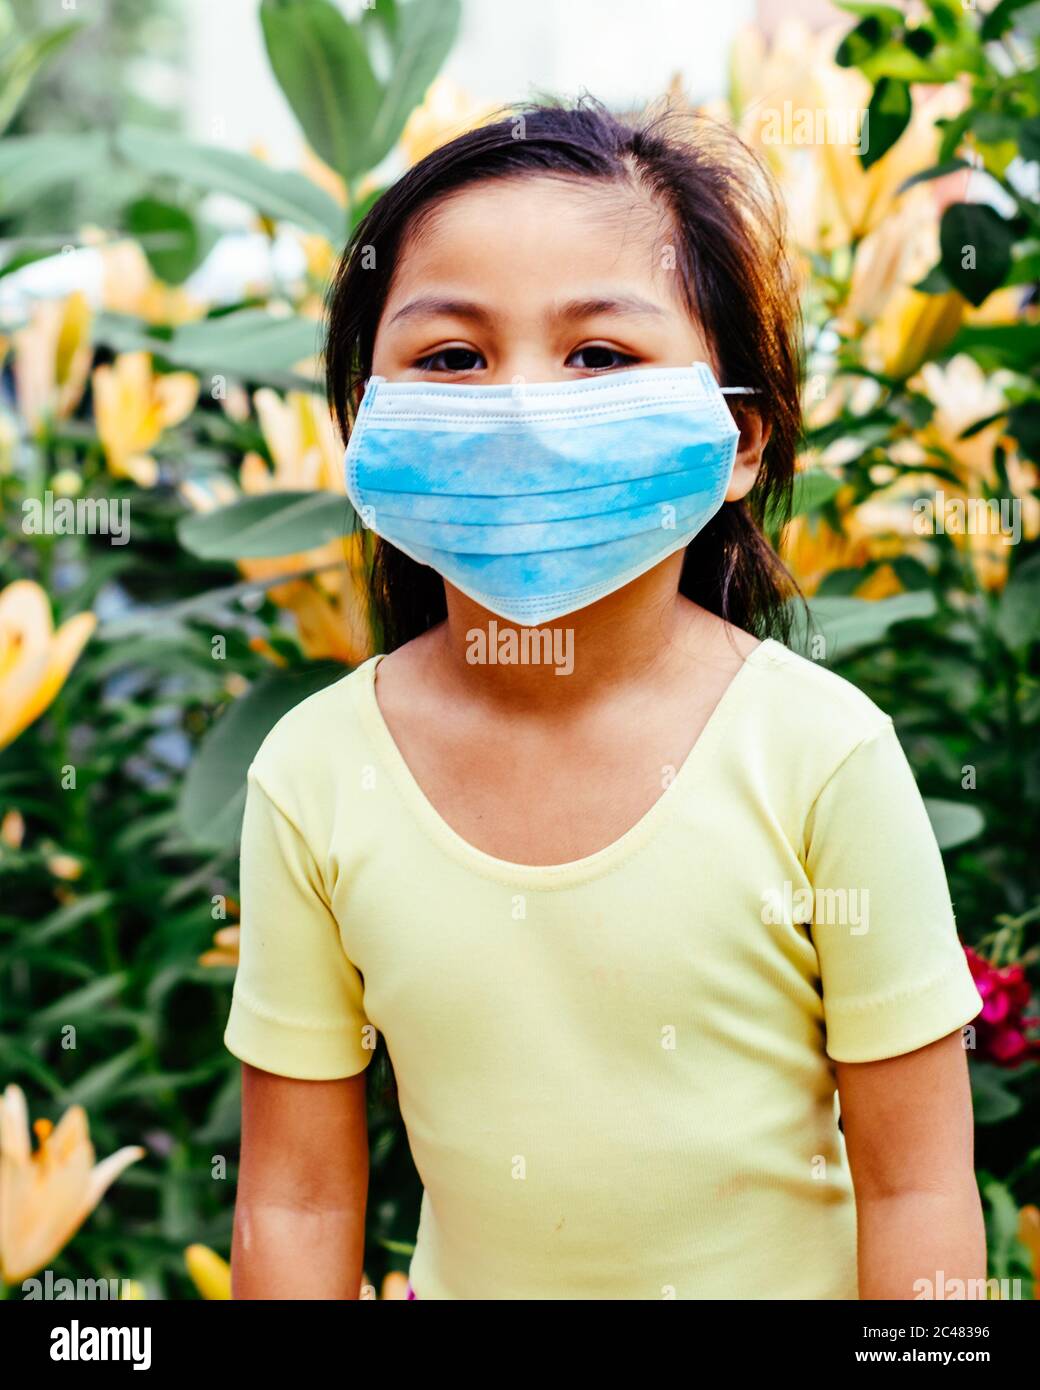 Mexican American girl is wearing a blue face mask while outdoors Stock Photo